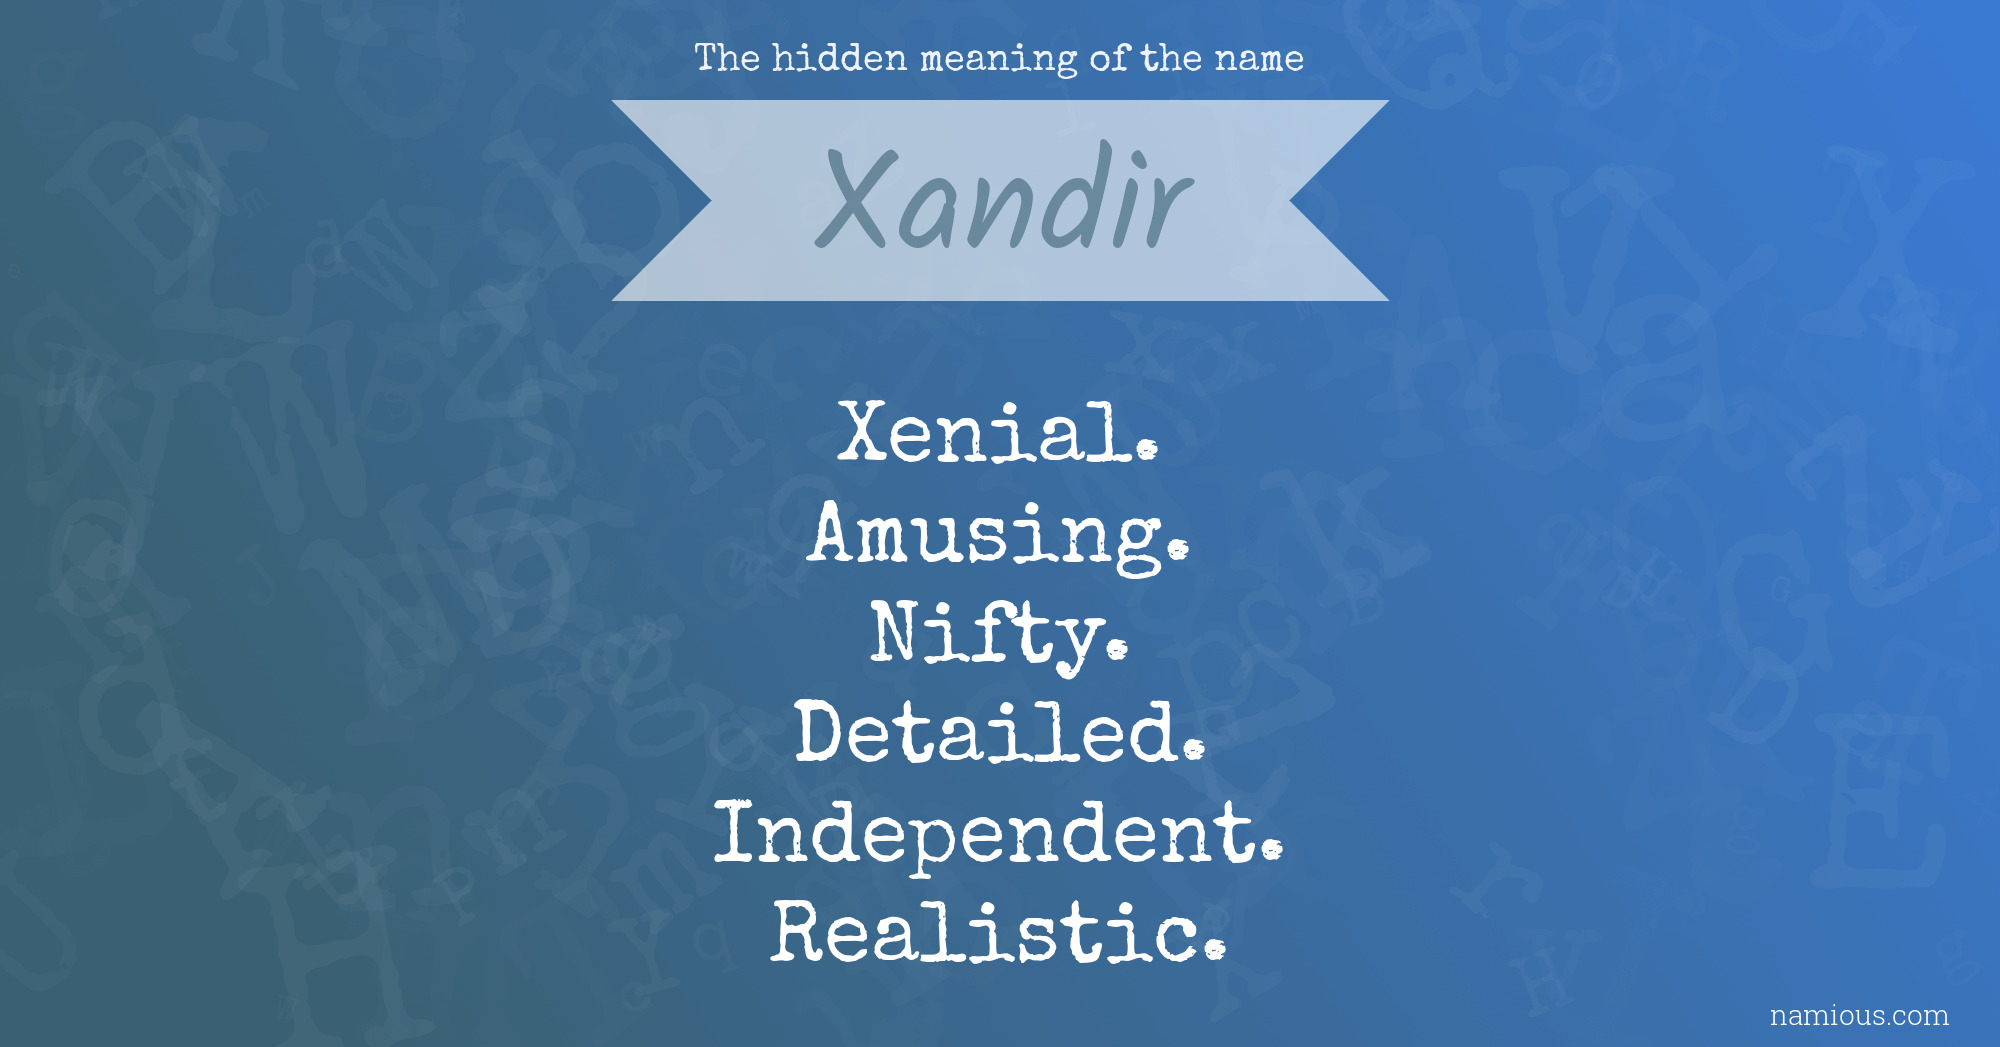 The hidden meaning of the name Xandir